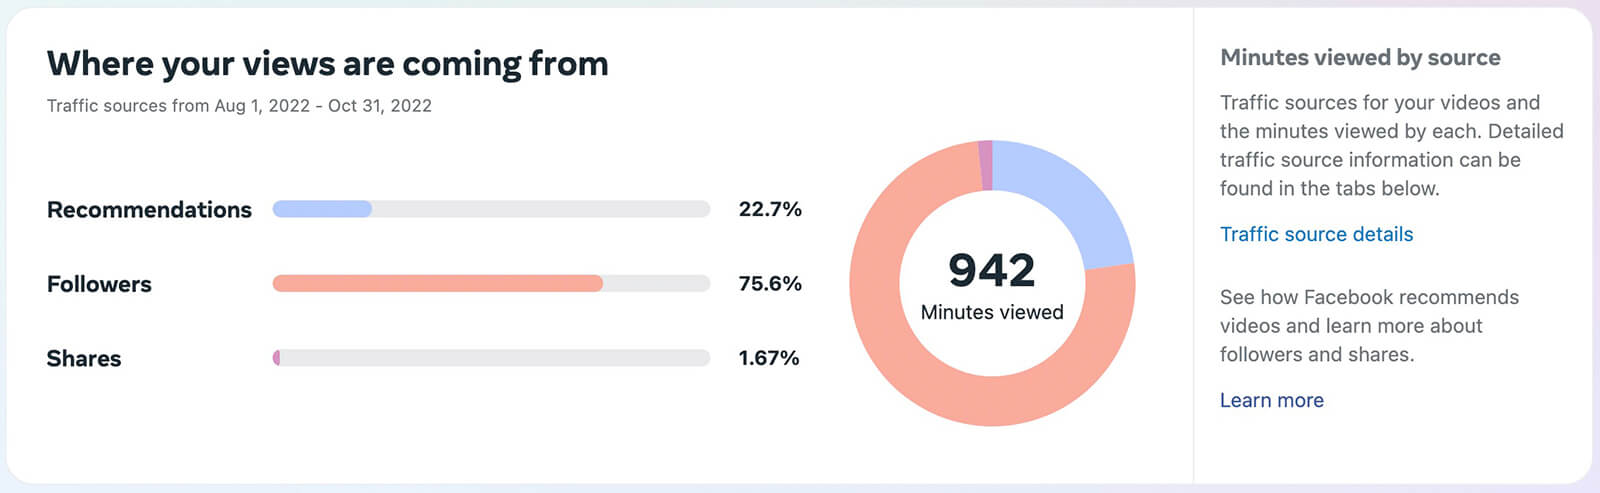 how-to-track-instagram-and-video-content-performance-audience-retention-tab-where-audience-is-coming-from-recommendations-shares-follwers-example-24